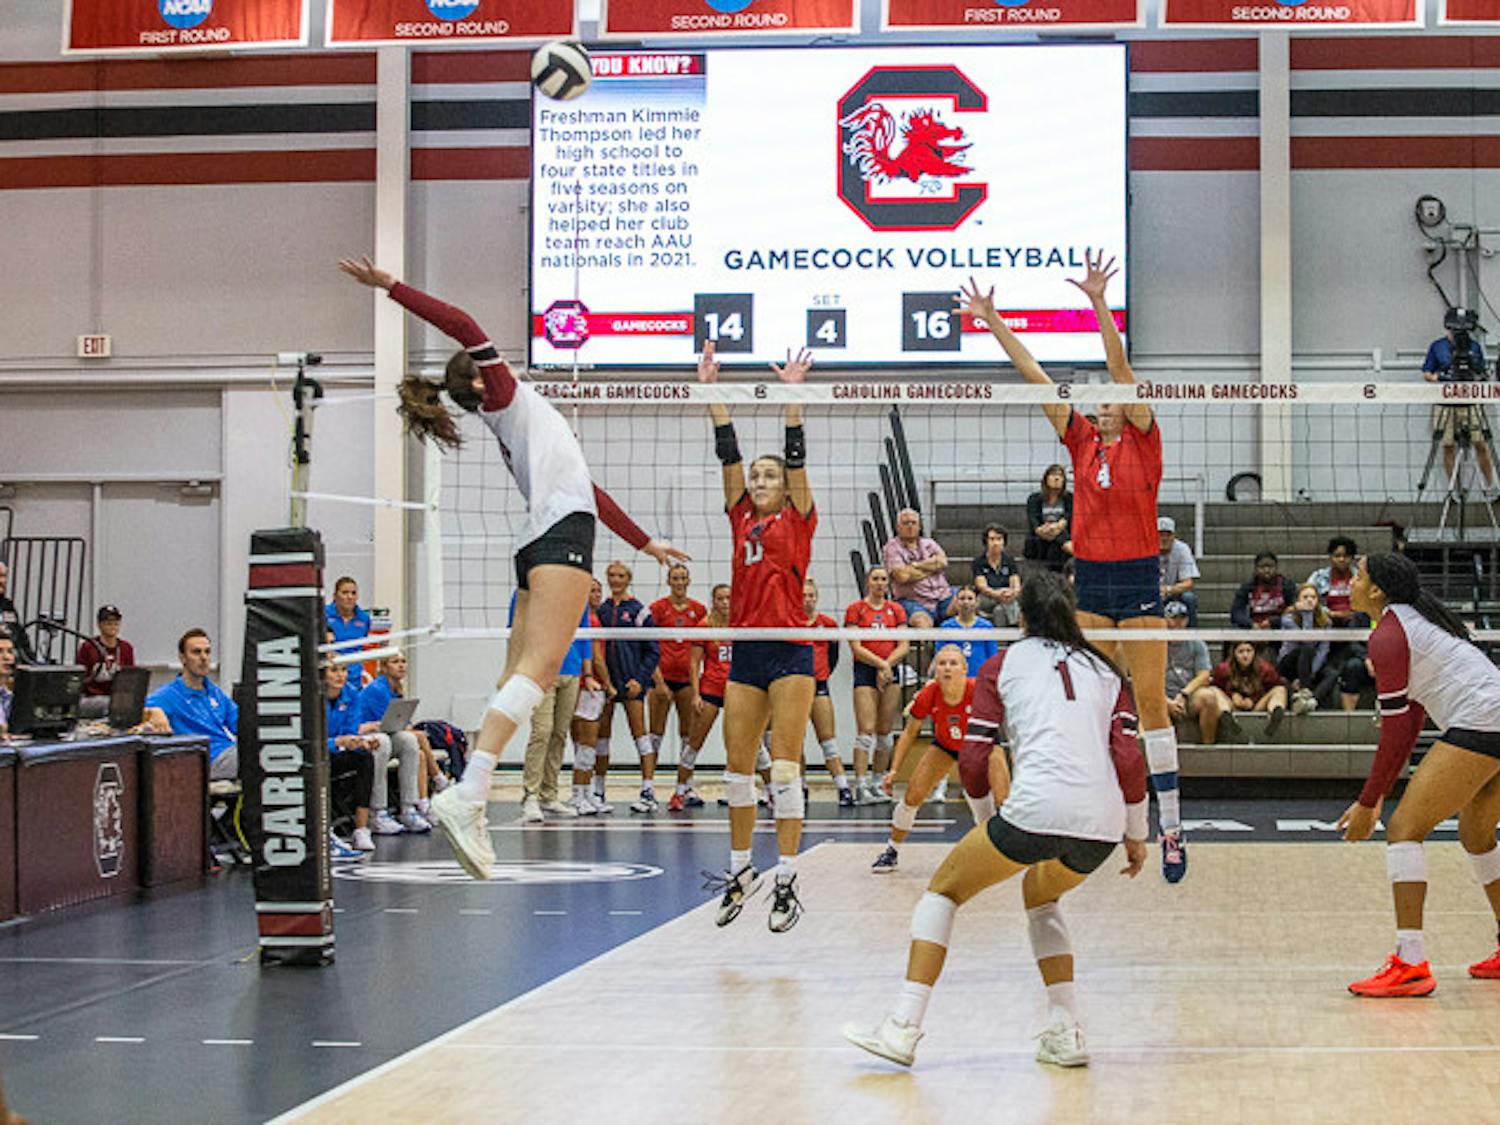 Freshman outside hitter Alayna Johnson spikes the ball during the fourth set of the game on Nov. 5, 2022. The Rebels beat the Gamecock 3-1 in the second game of the series.&nbsp;